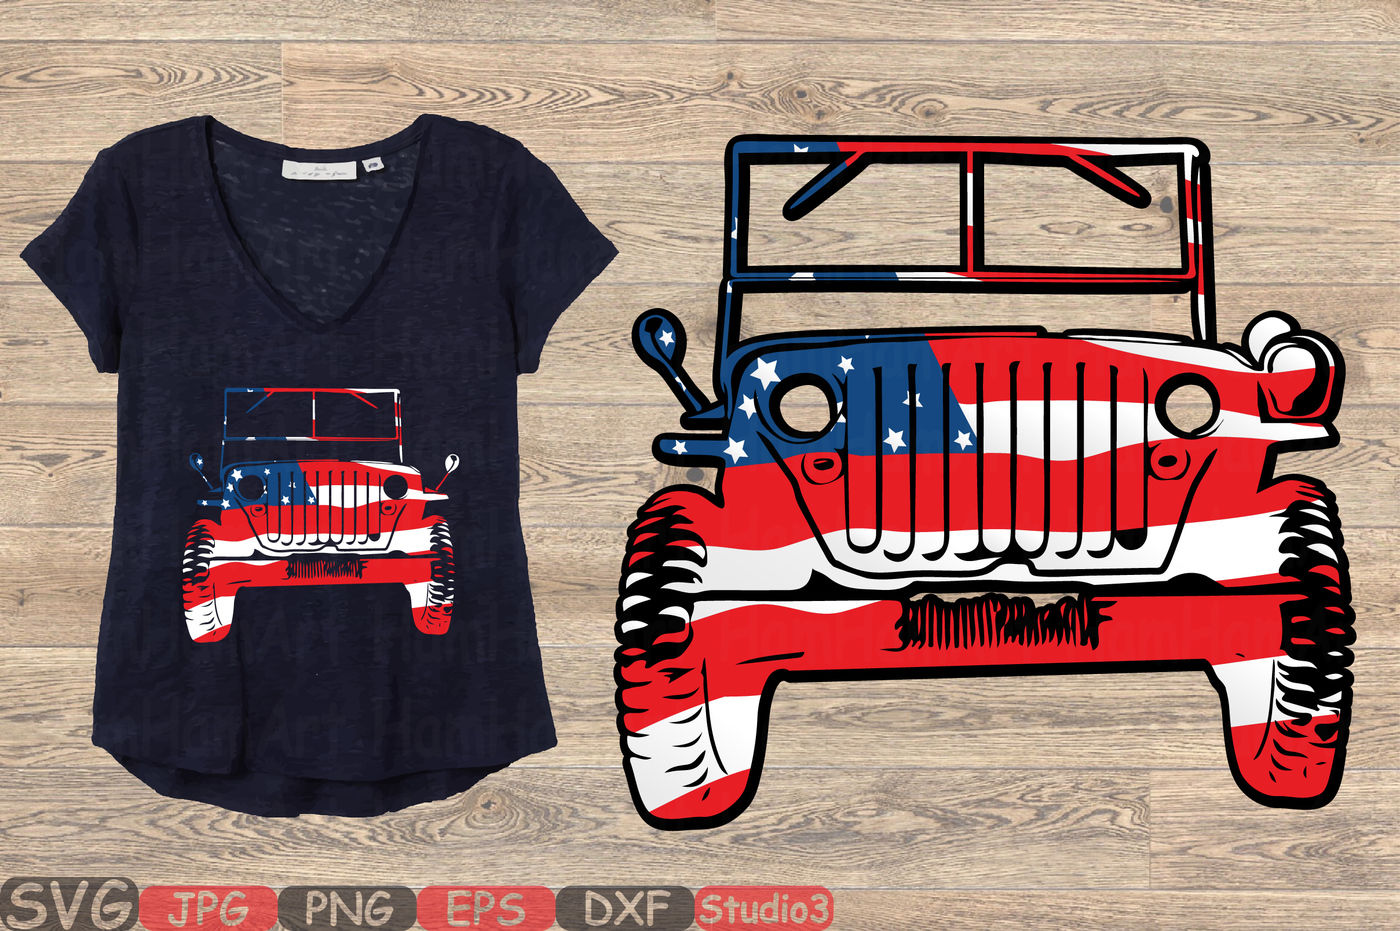 ori 3462268 1e9da509d8c9610cdb46e838d9ba1ea3b5c1fd75 america jeep svg 4th of july svg american flag 82sv